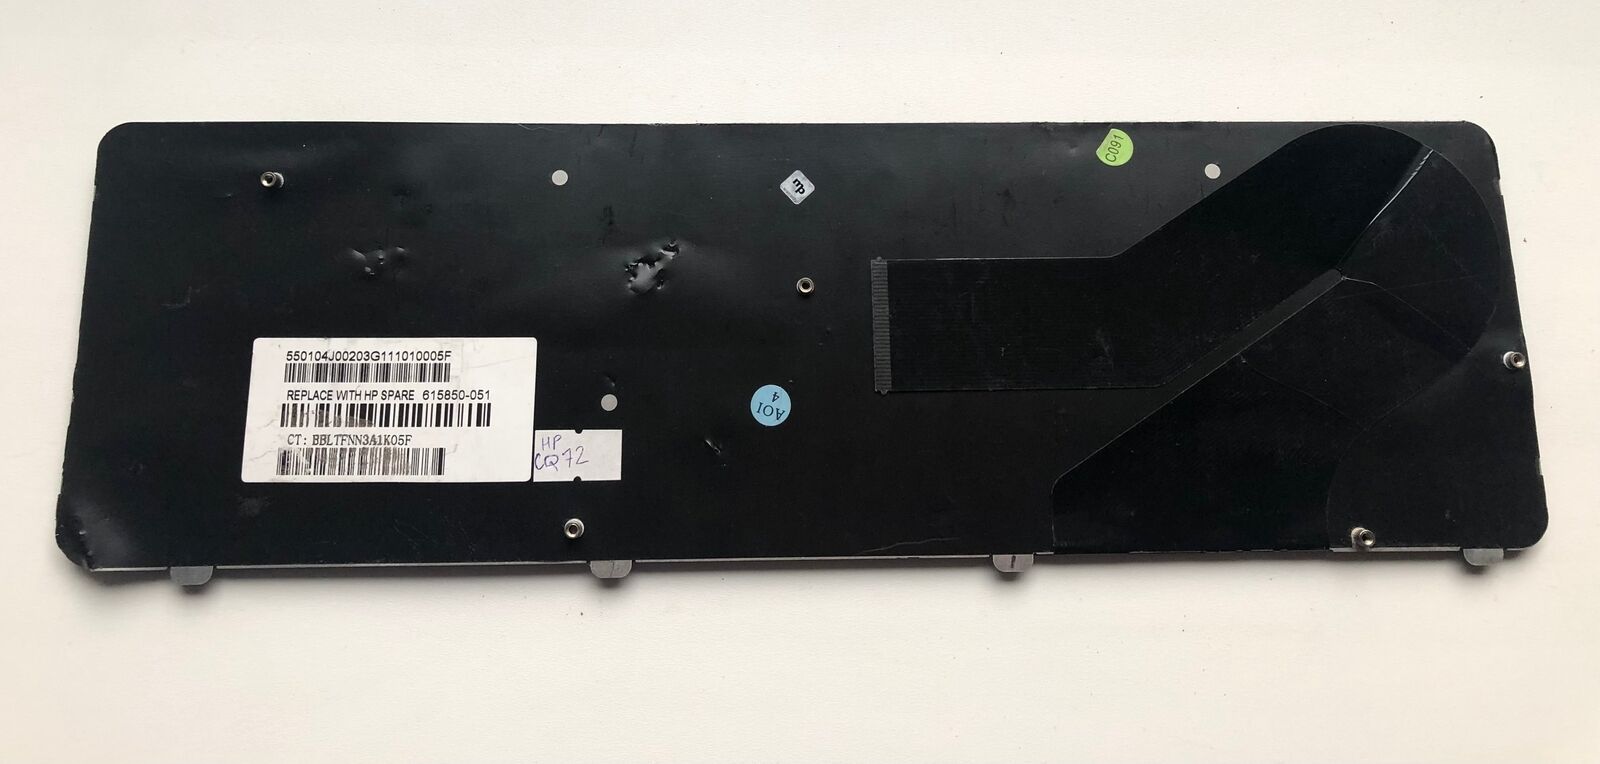 615850-051 keyboard - HP G72 - for parts